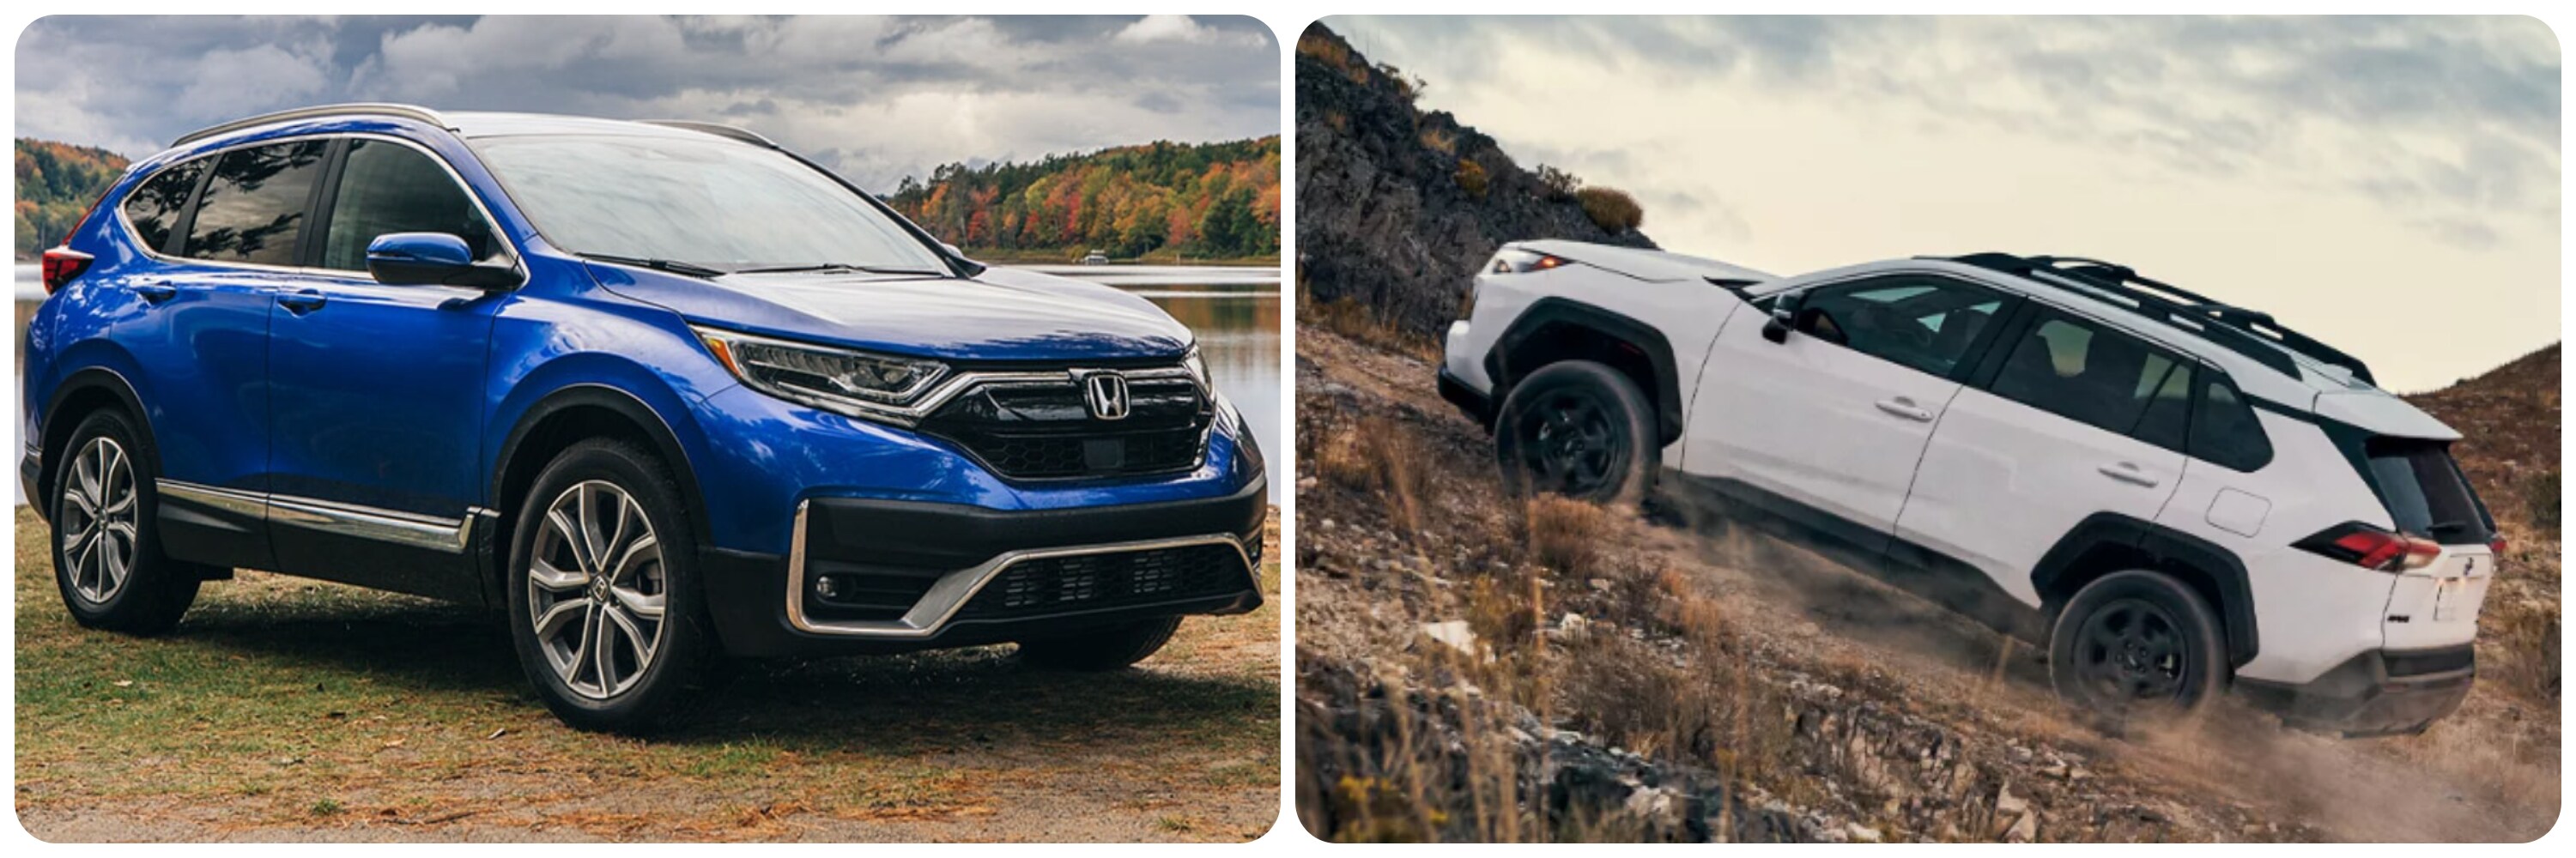 On the left a bright blue 2022 Honda CR-V sits parked next to a lake. On the right a white 2022 Toyota RAV4 climbs a rocky hill